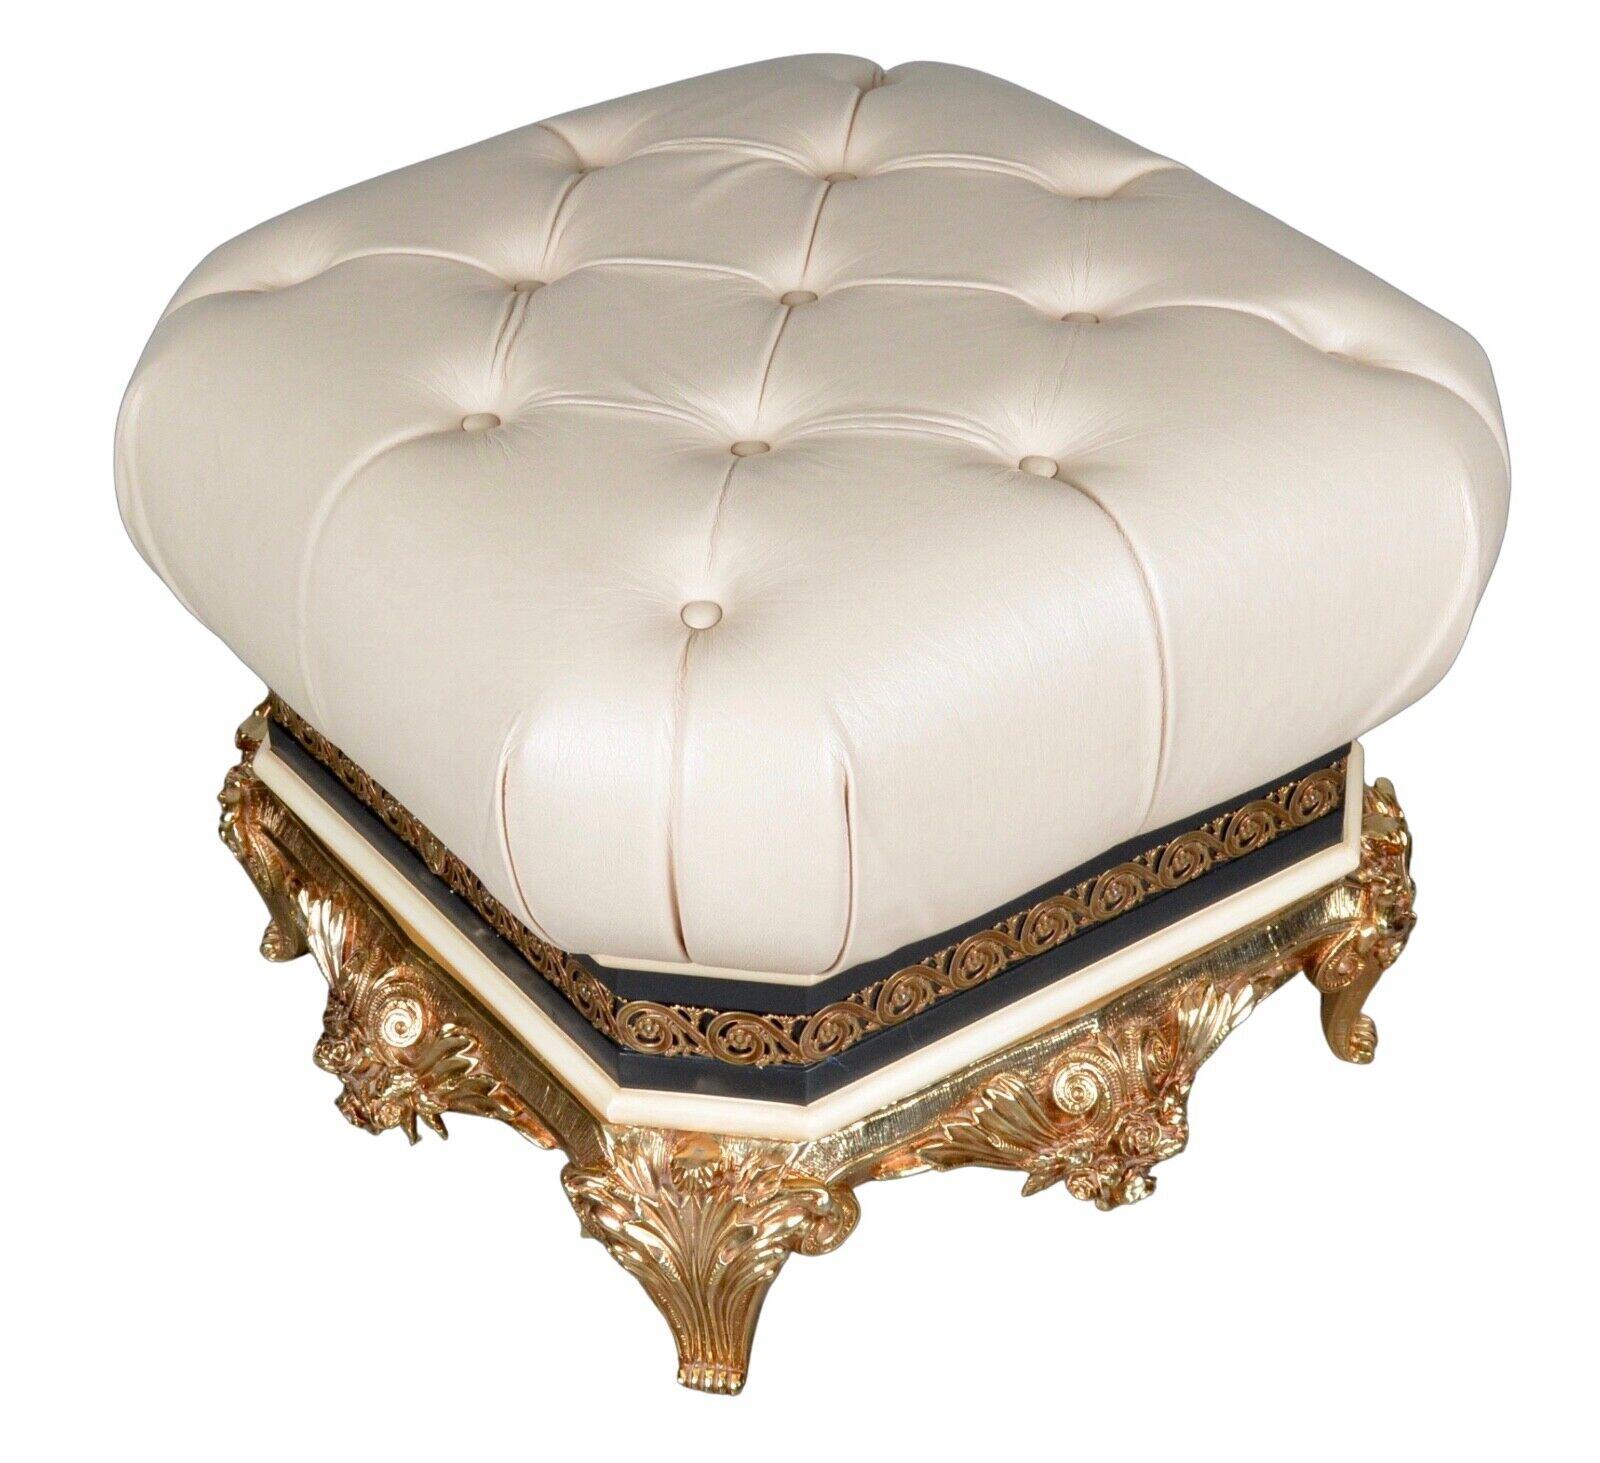 We are delighted to offer for sale this lovely rare rococo Vidal Grau footstool 

Their furniture range was based on a contemporary design using traditional quality materials such as wood, metal, glass, marble, and other innovative elements such